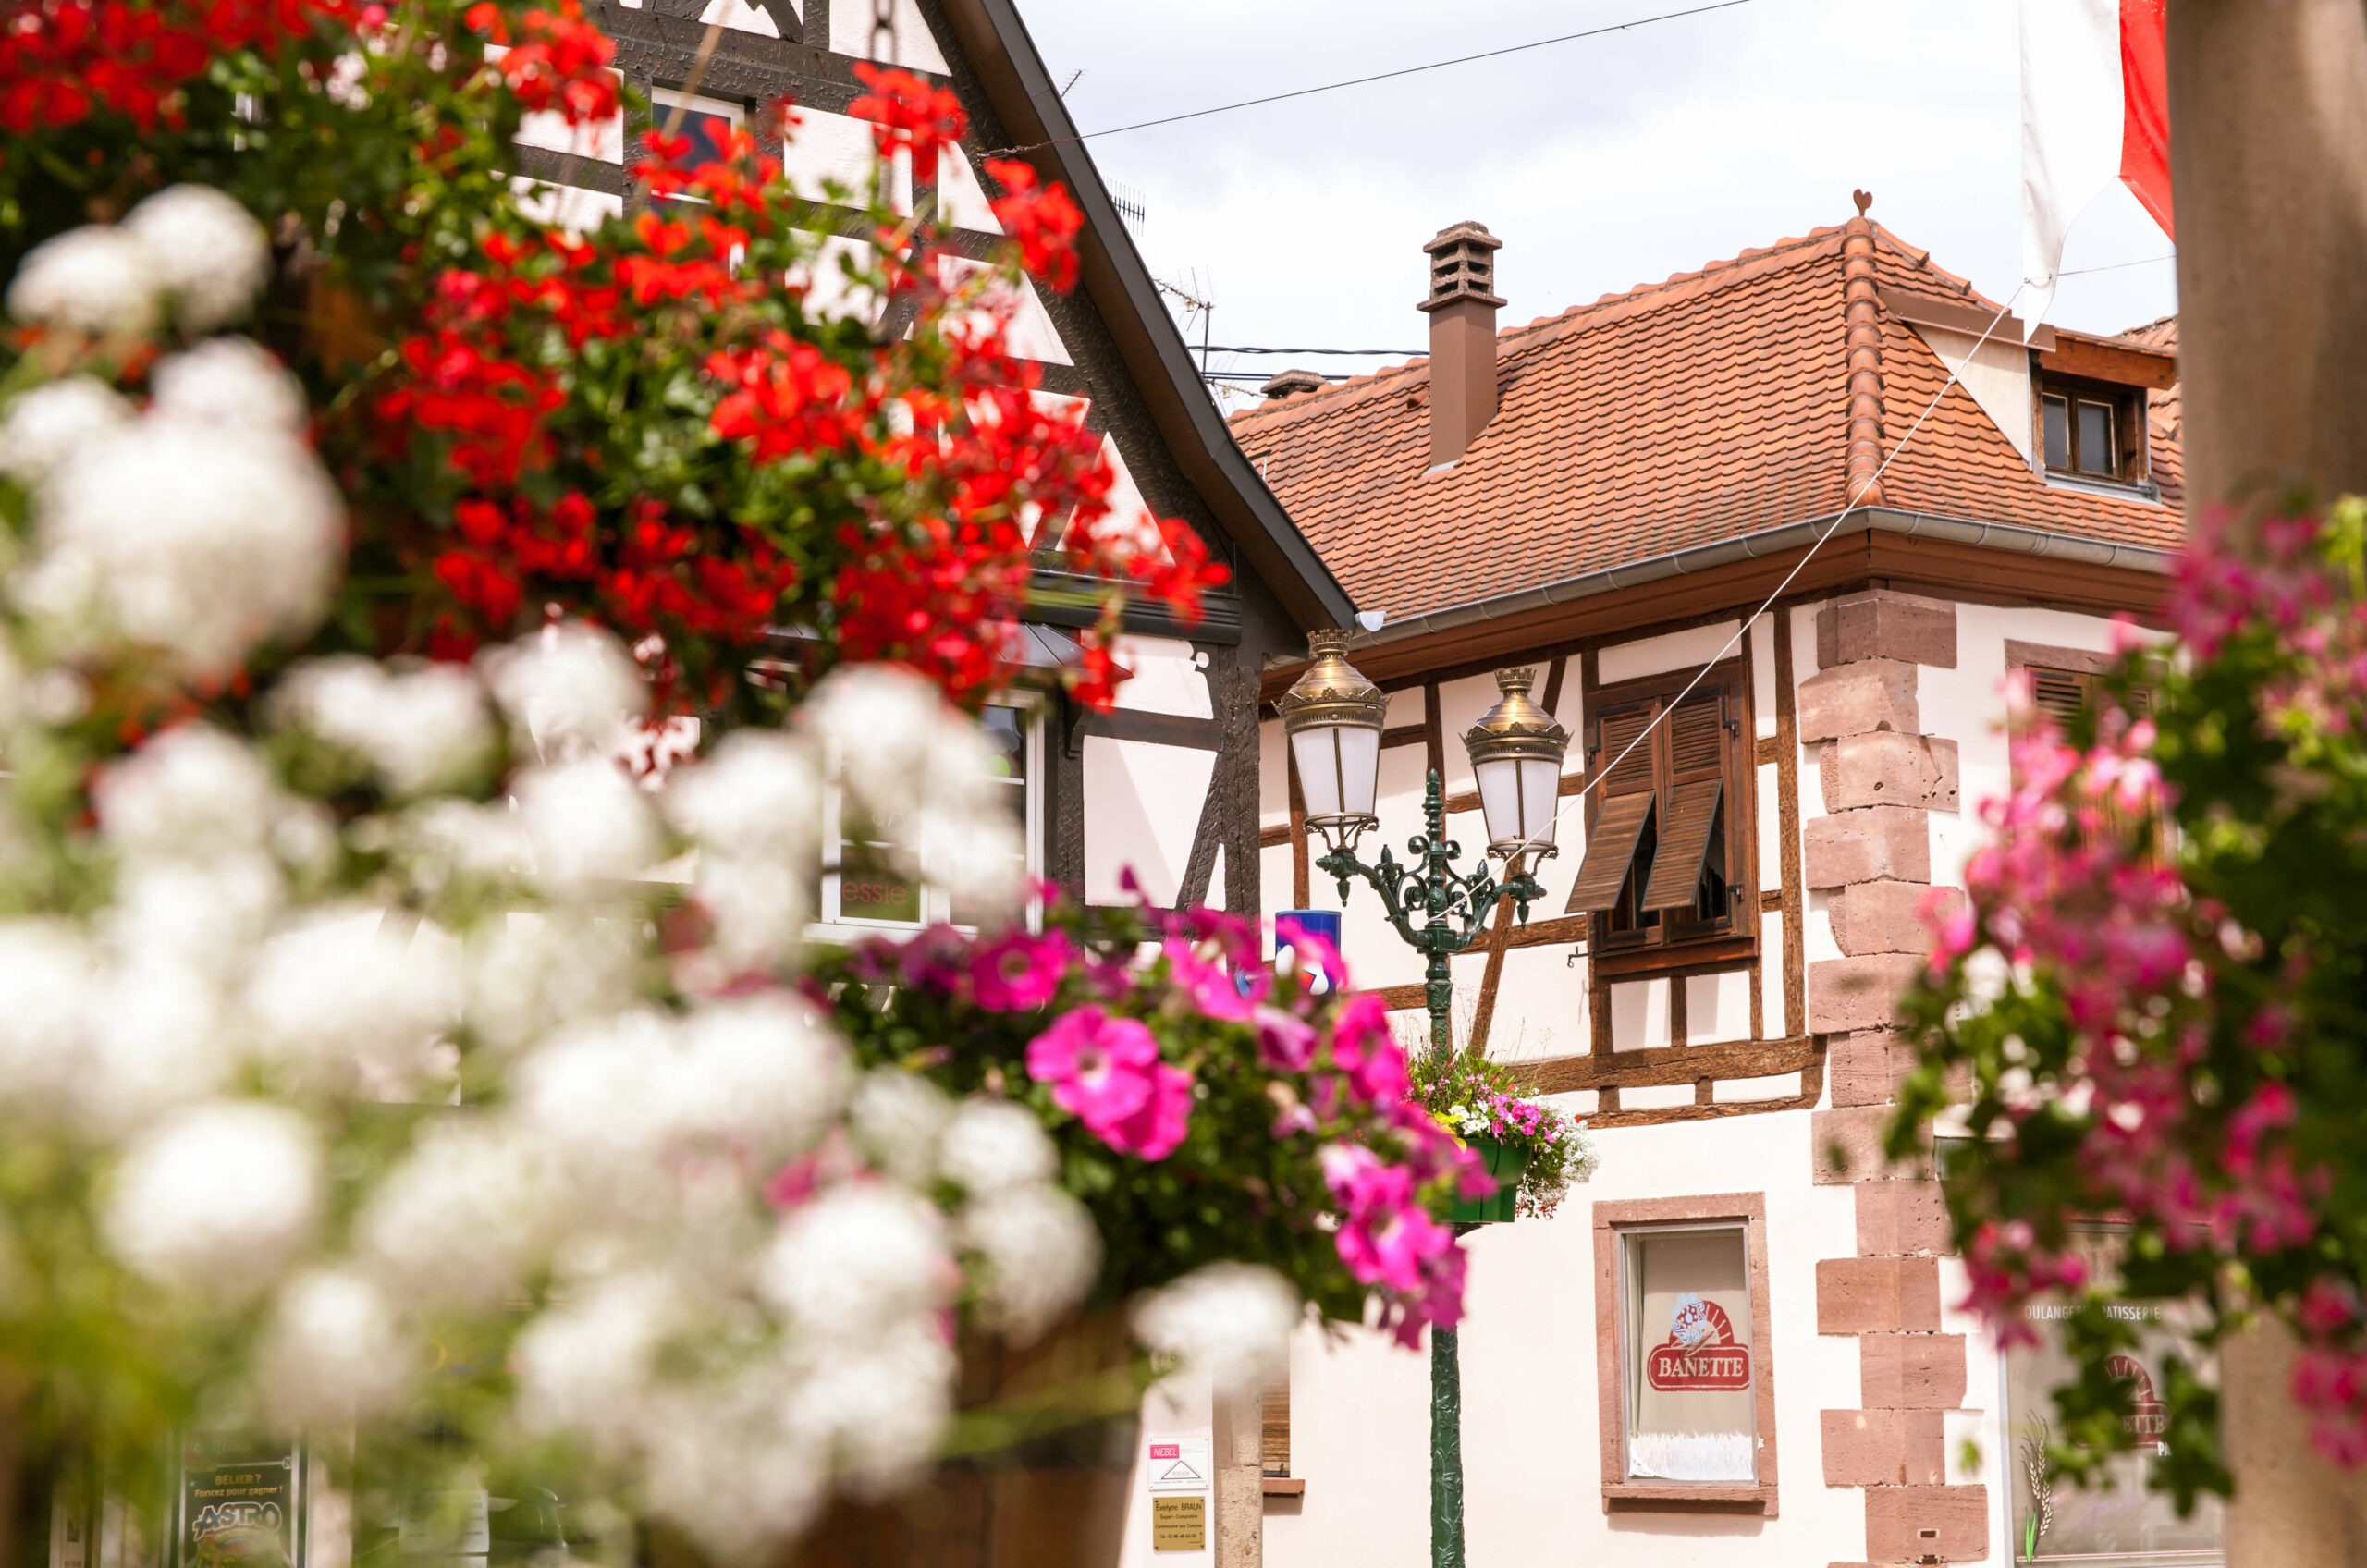 Alsace France Wine Route - Nowhere & Everywhere - Sustainable travel Europe road trip